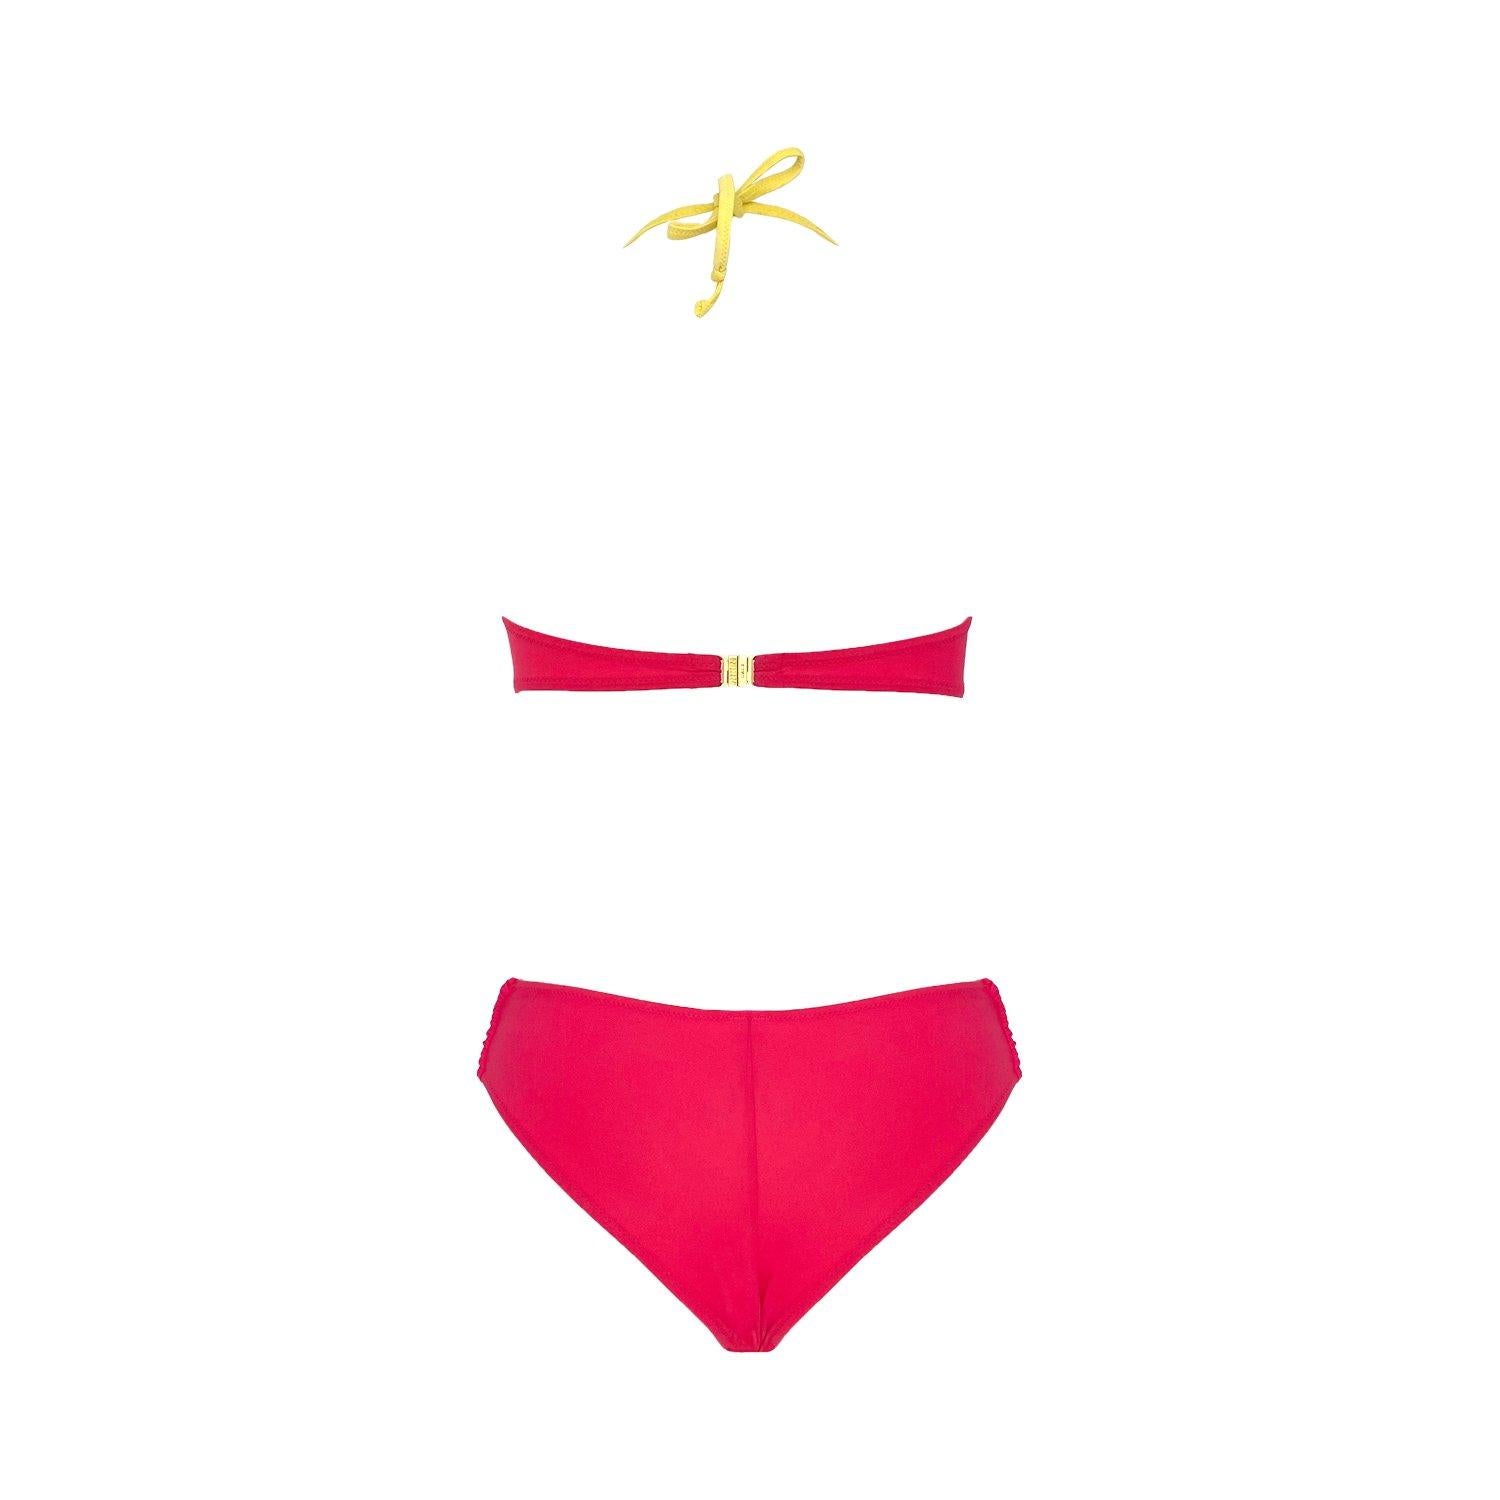 Iconic vintage yellow and hot pink swimsuit by Moschino from the from the early 2000s in a cut out 80s style. Featuring a bow waistband which can be worn up for a cut out effect, or lower for a classic cut. Moschino gold clasp to the back, tie